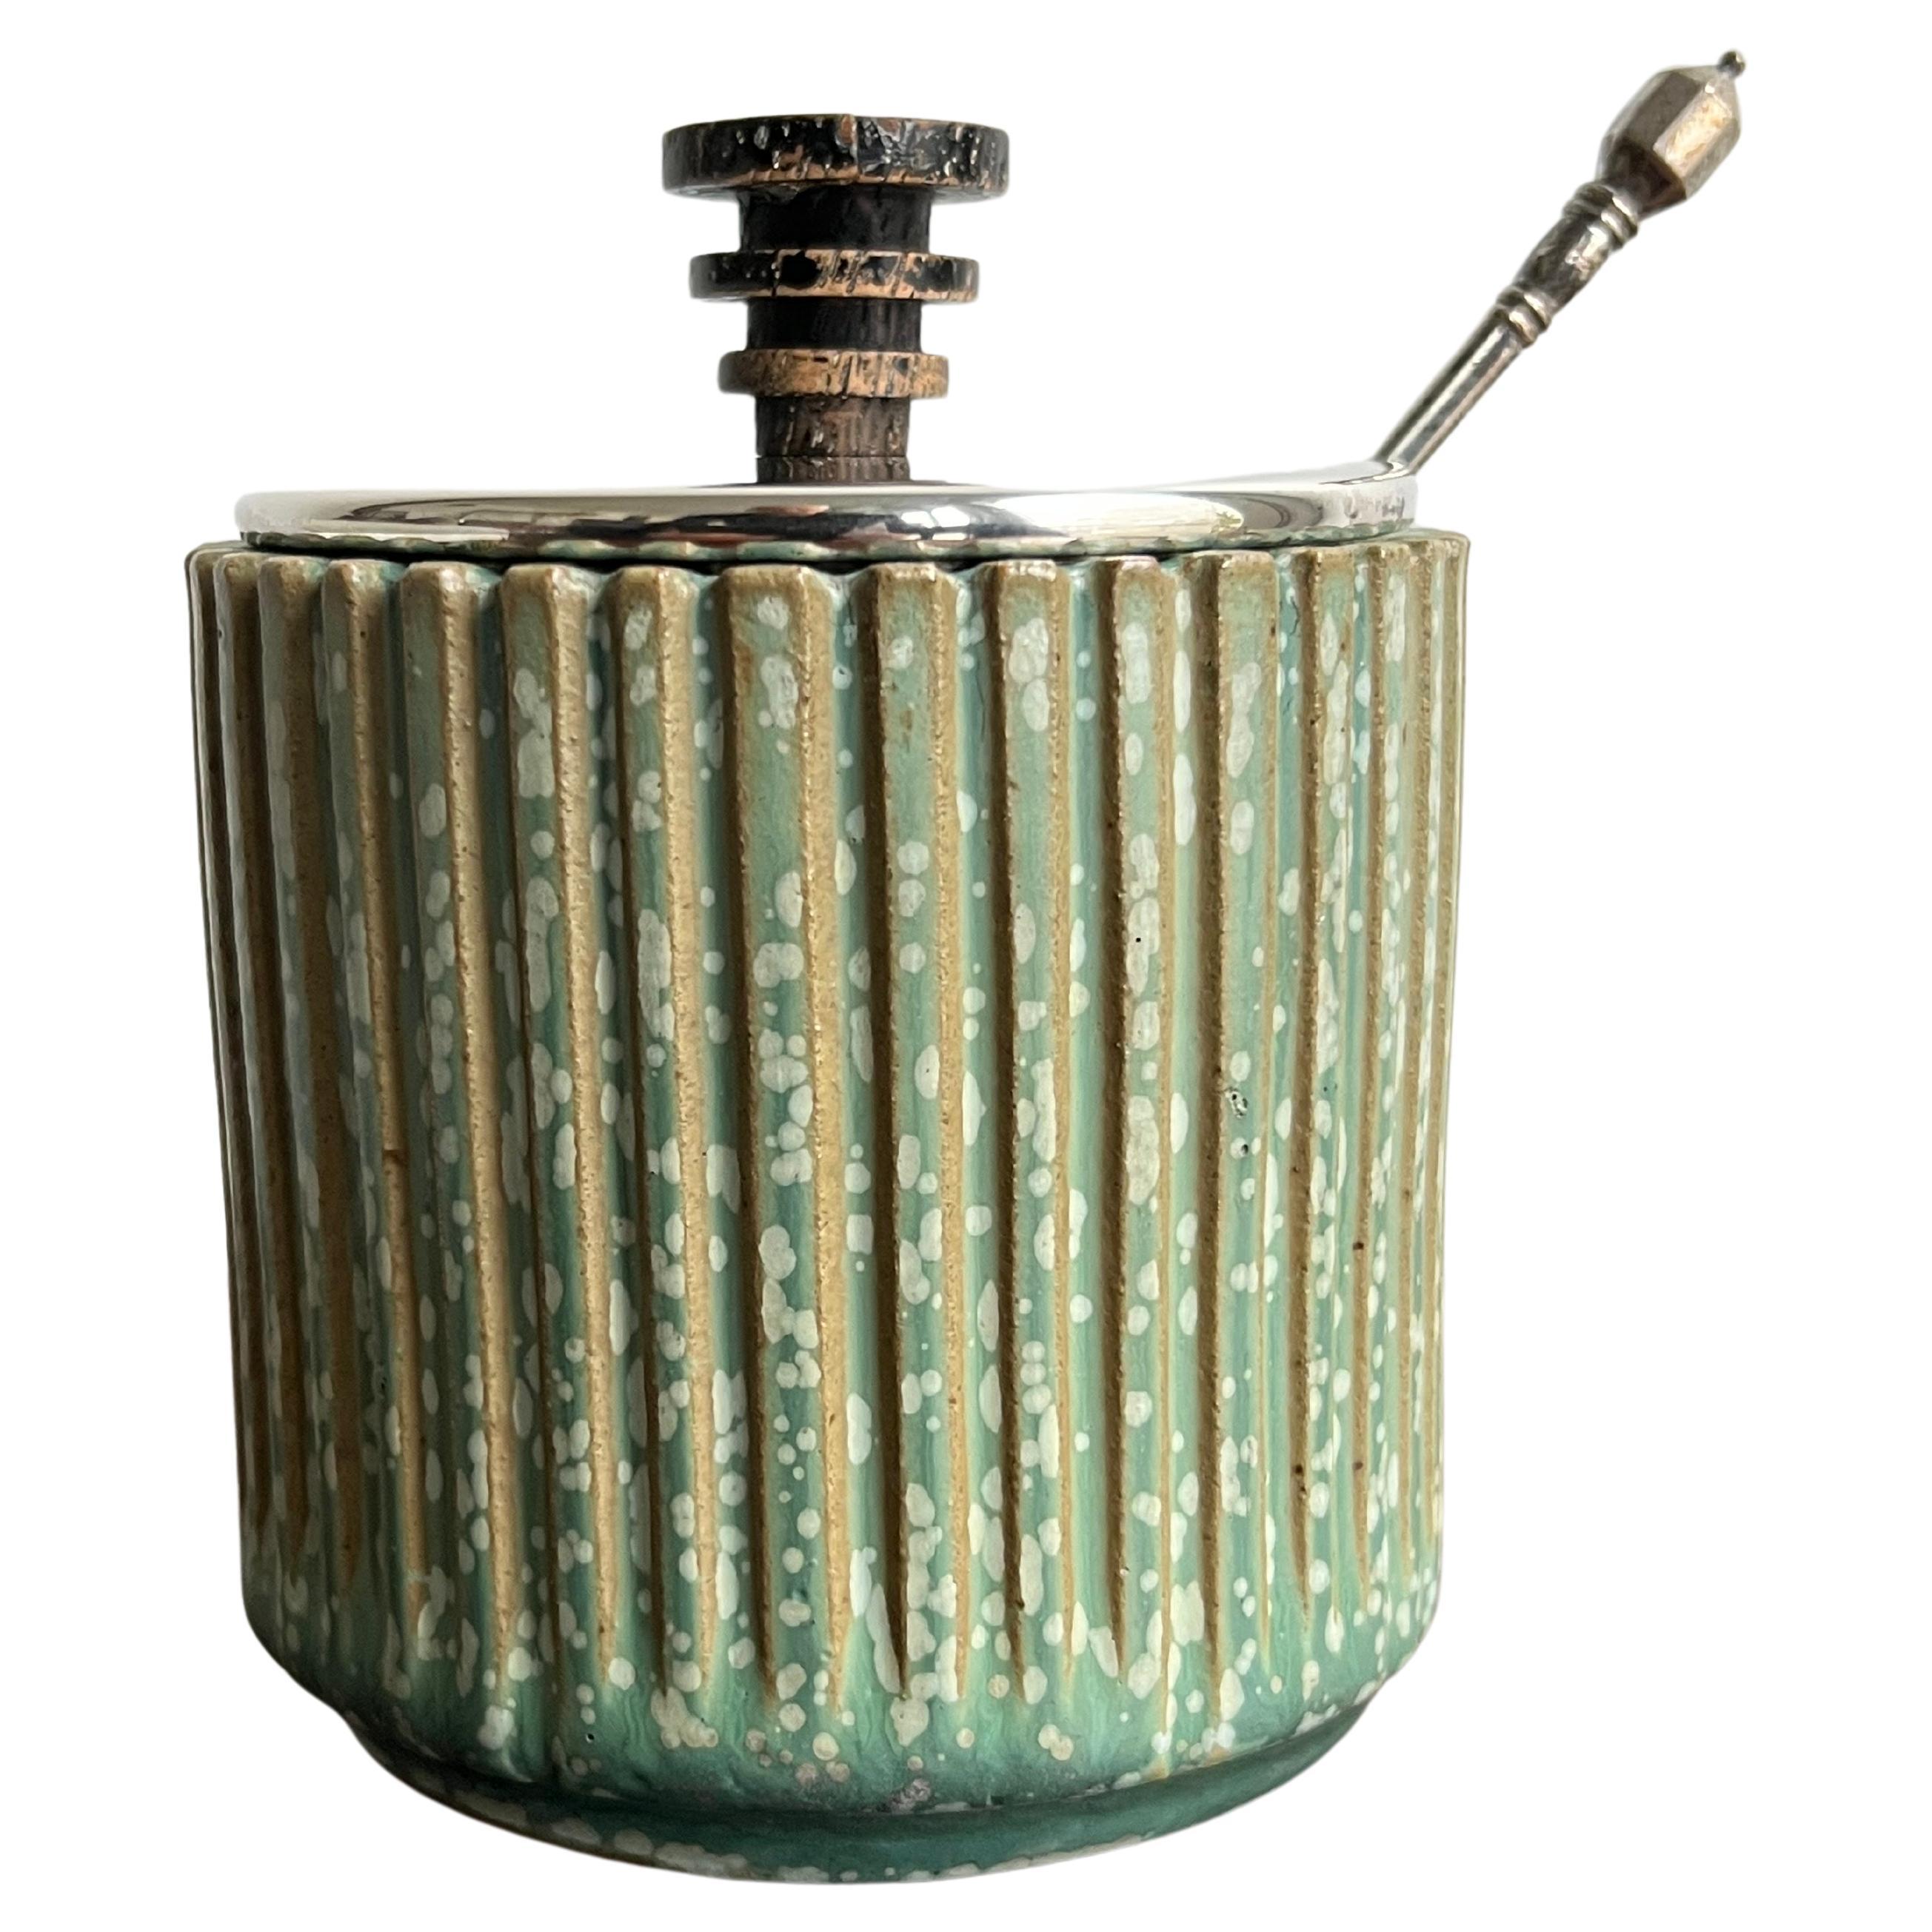 Arne Bang, Marmelade Jar, Stoneware with Silver Lid and Spoon, Denmark, 1930’s